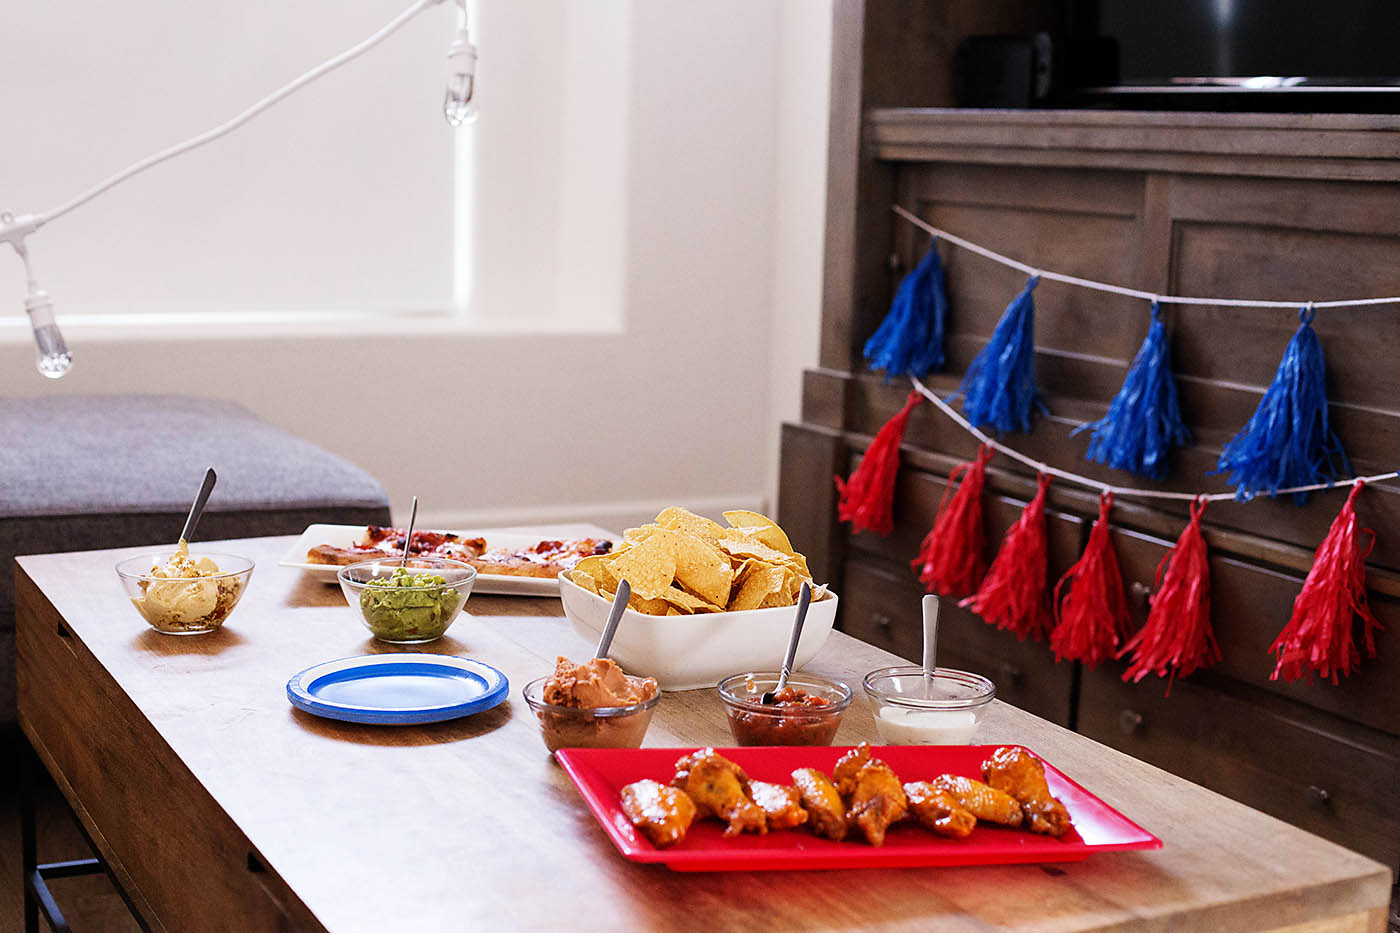 Homegating (a tailgating party at home) made easy with lights that change to your team’s colors and simple food favorites!